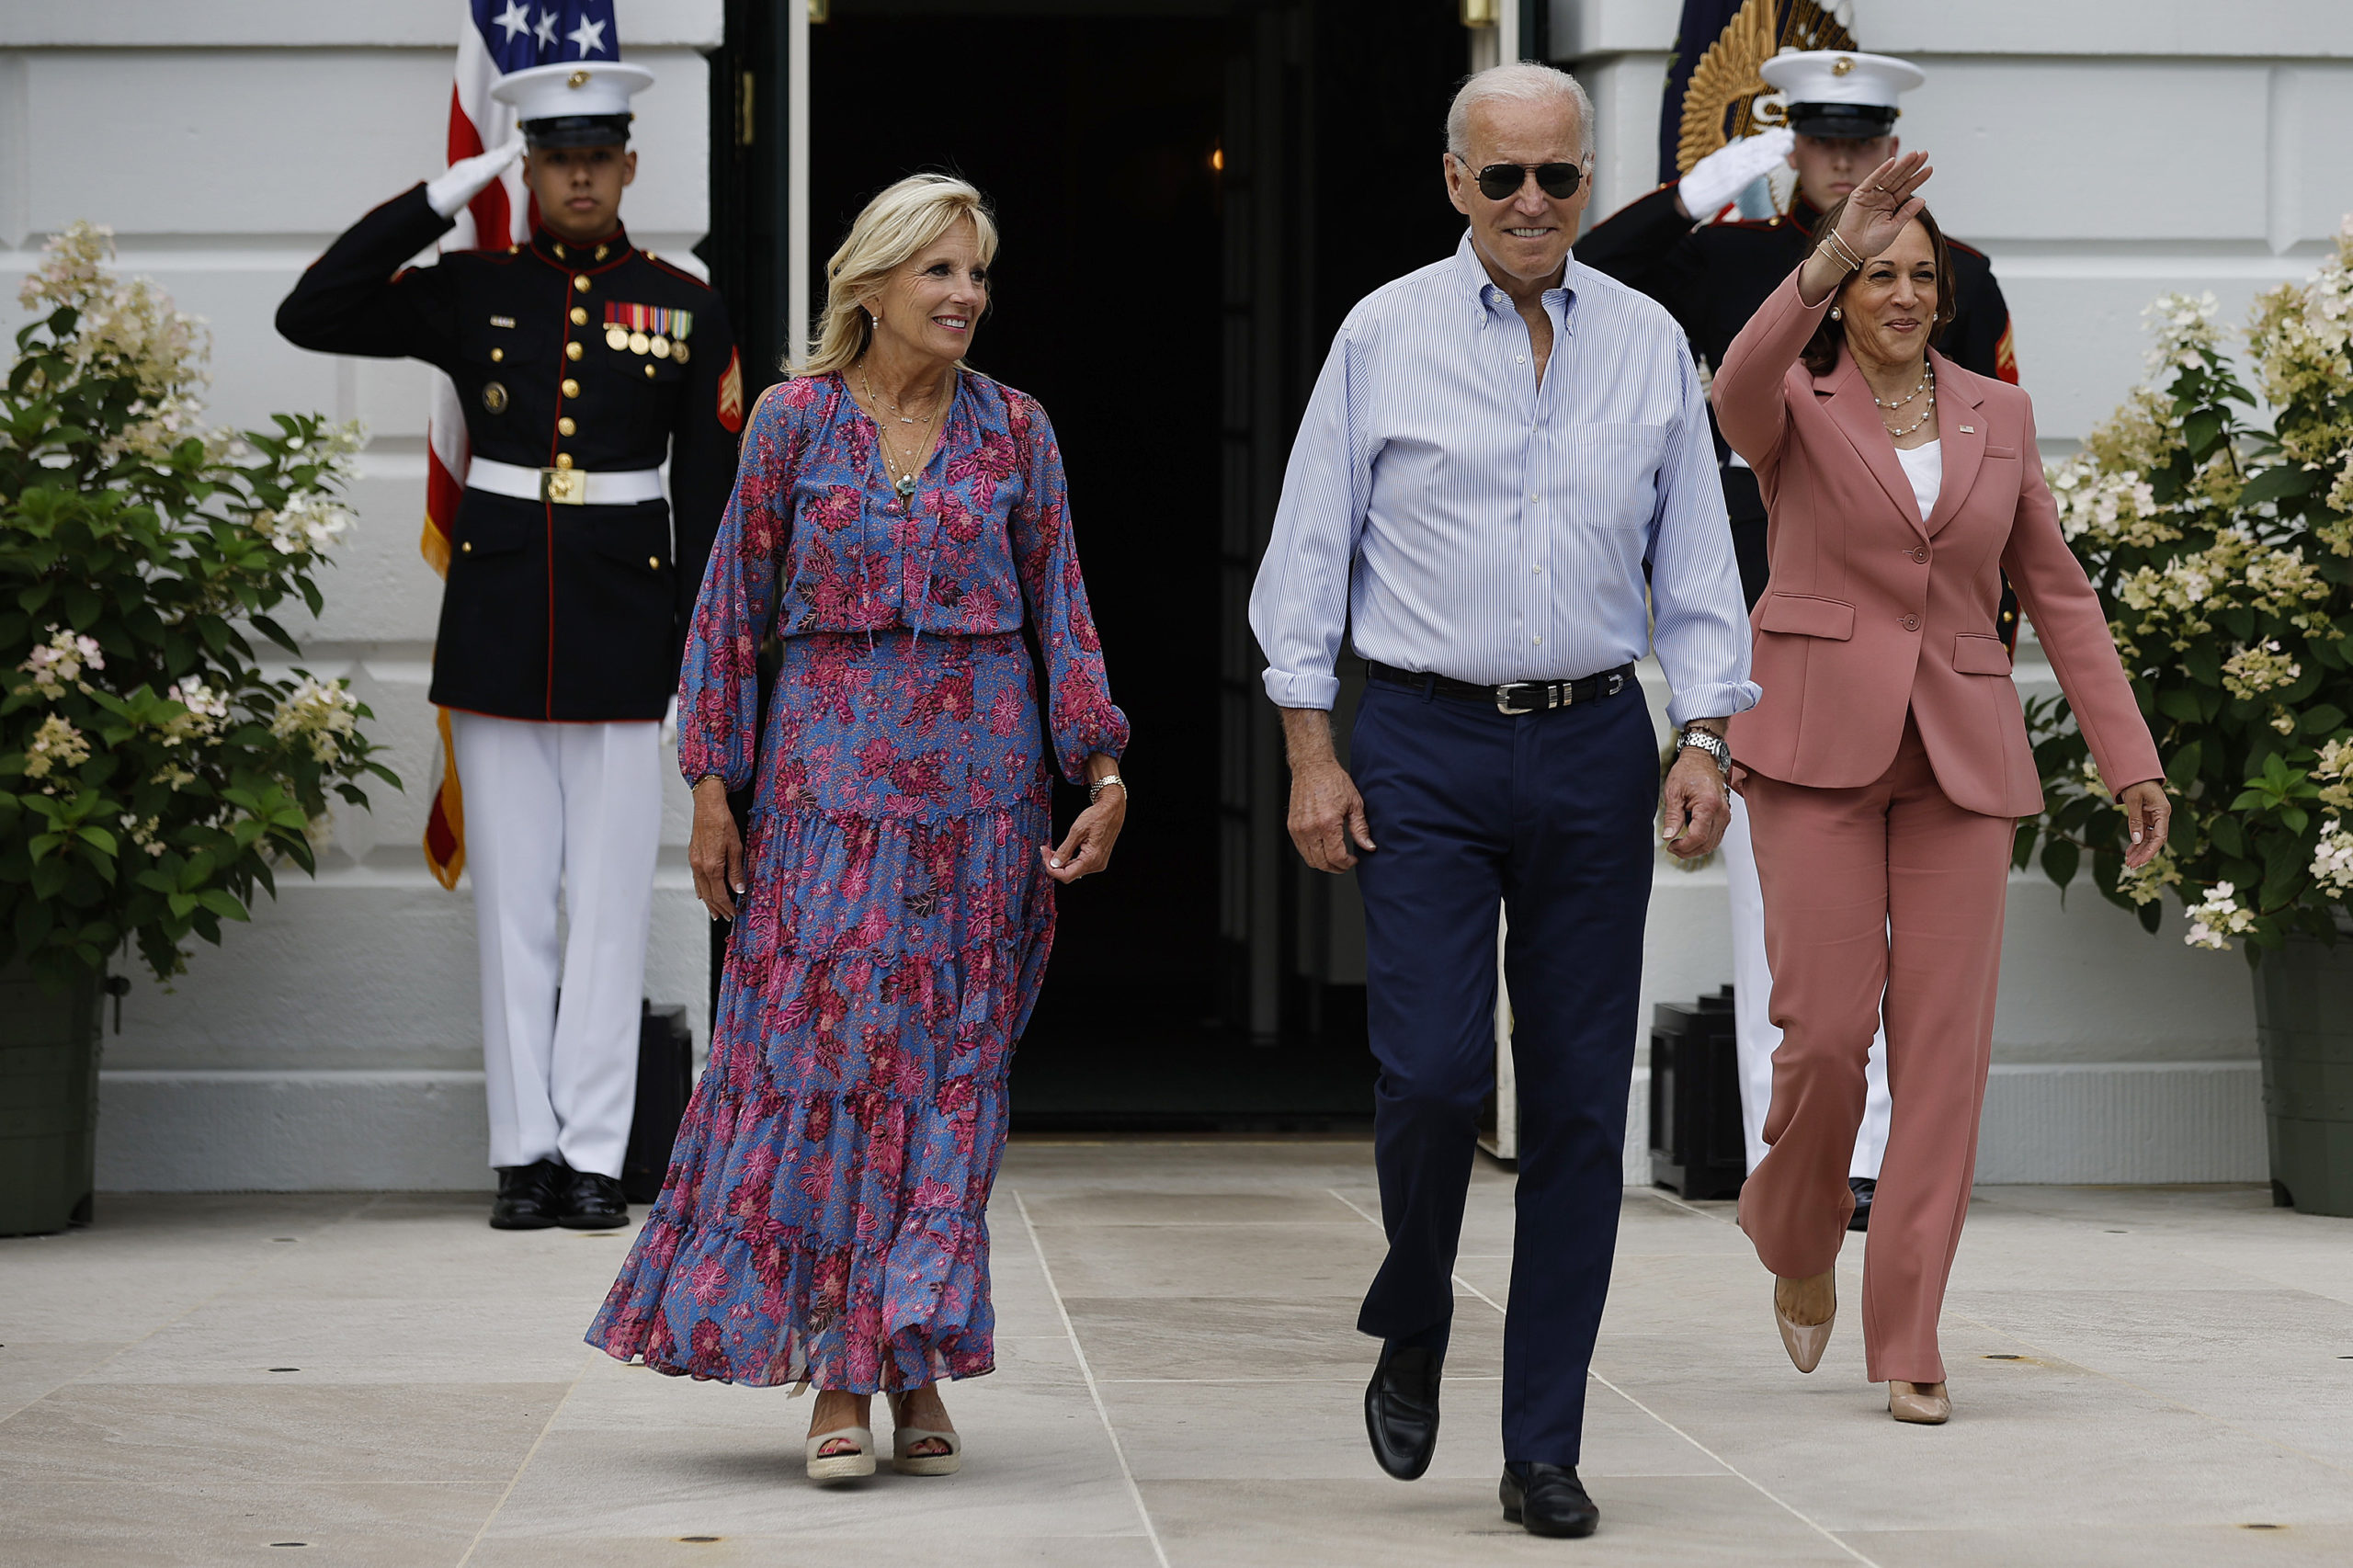 U.S. first lady Jill Biden, President Joe Biden and Vice President Kamala Harris arrive at the Congressional Picnic on the South Lawn of the White House on July 12, 2022 in Washington, DC. An annual opportunity for members of Congress and their families to visit administration officials and others for non-partisan fellowship and entertainment, the picnic was cancelled in 2020 and 2021 due to the ongoing coronavirus pandemic. (Photo by Chip Somodevilla/Getty Images)